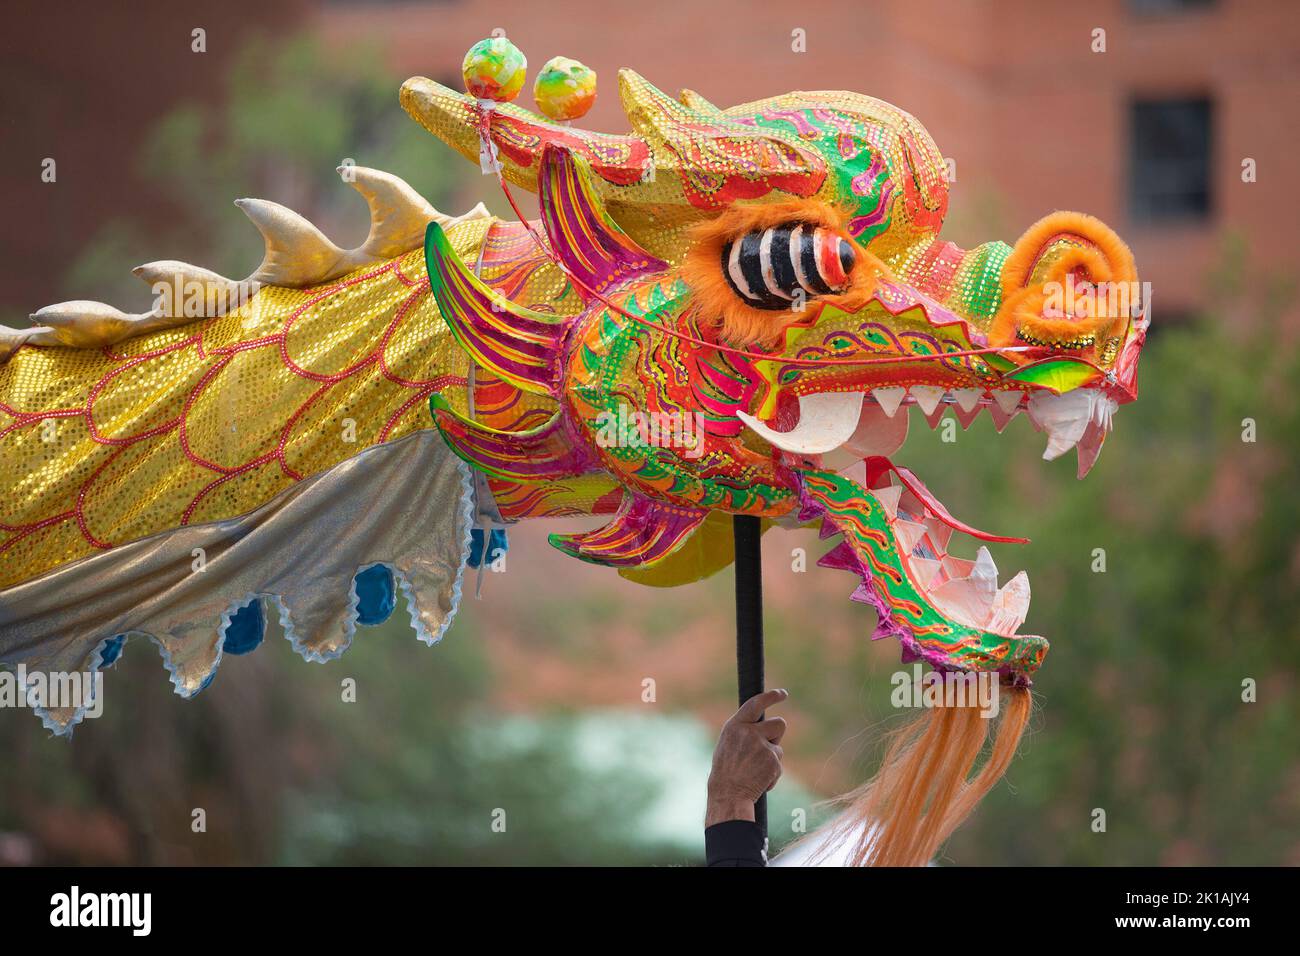 Traditional Chinese dragon dance with close up of dragon's head at Chinatown Street Festival in Calgary, Canada Stock Photo